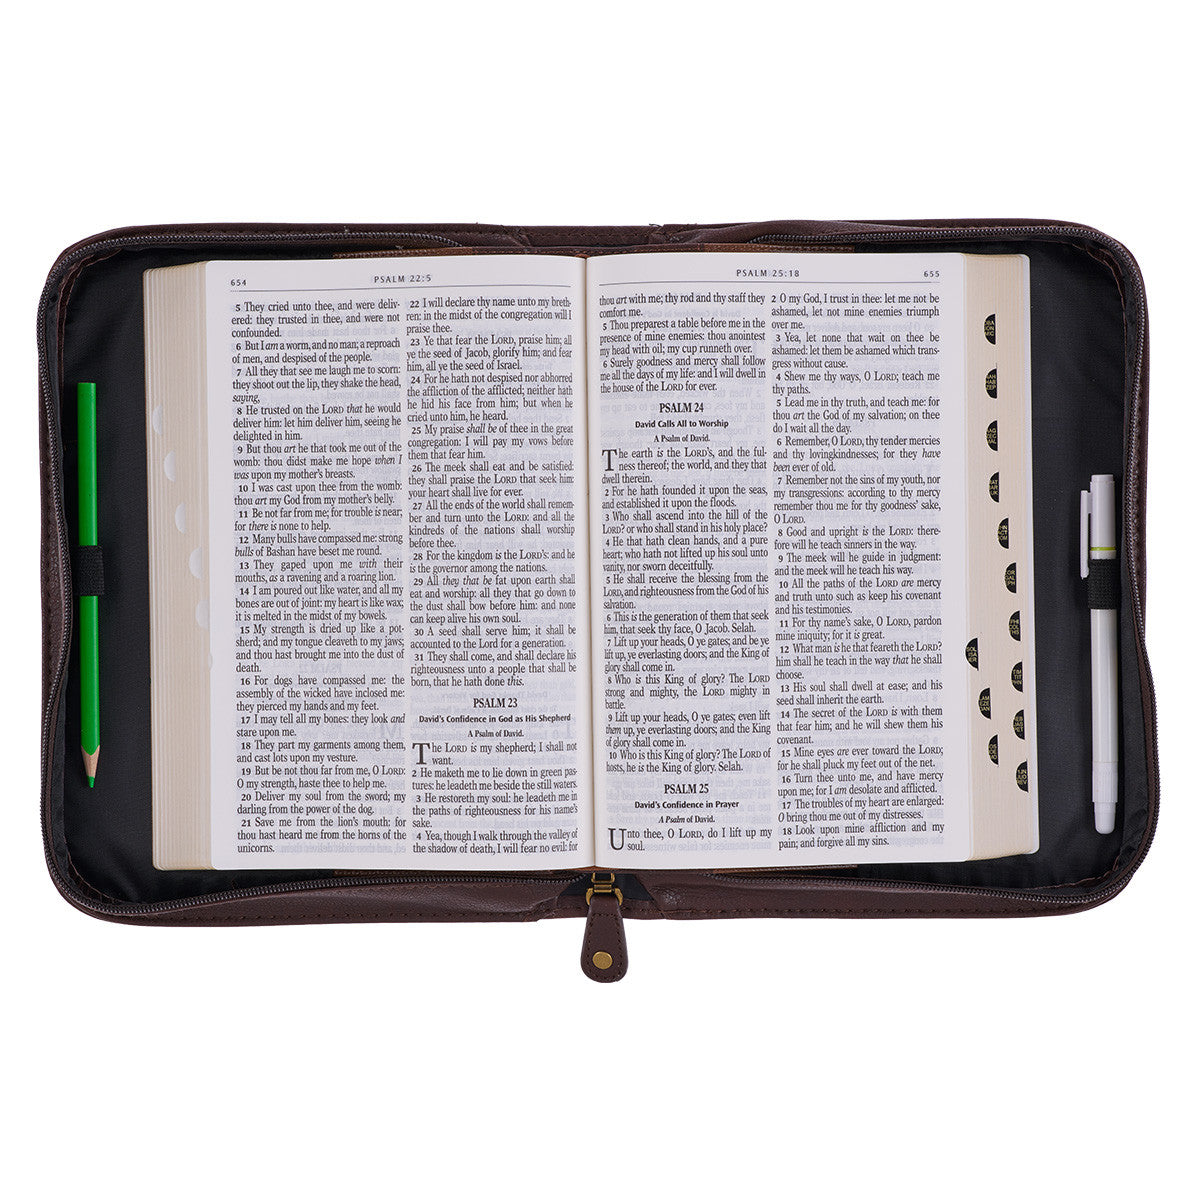 Do Not Be Afraid Two-tone Toffee and Chocolate Brown Faux Leather Bible Cover – Joshua 1:9